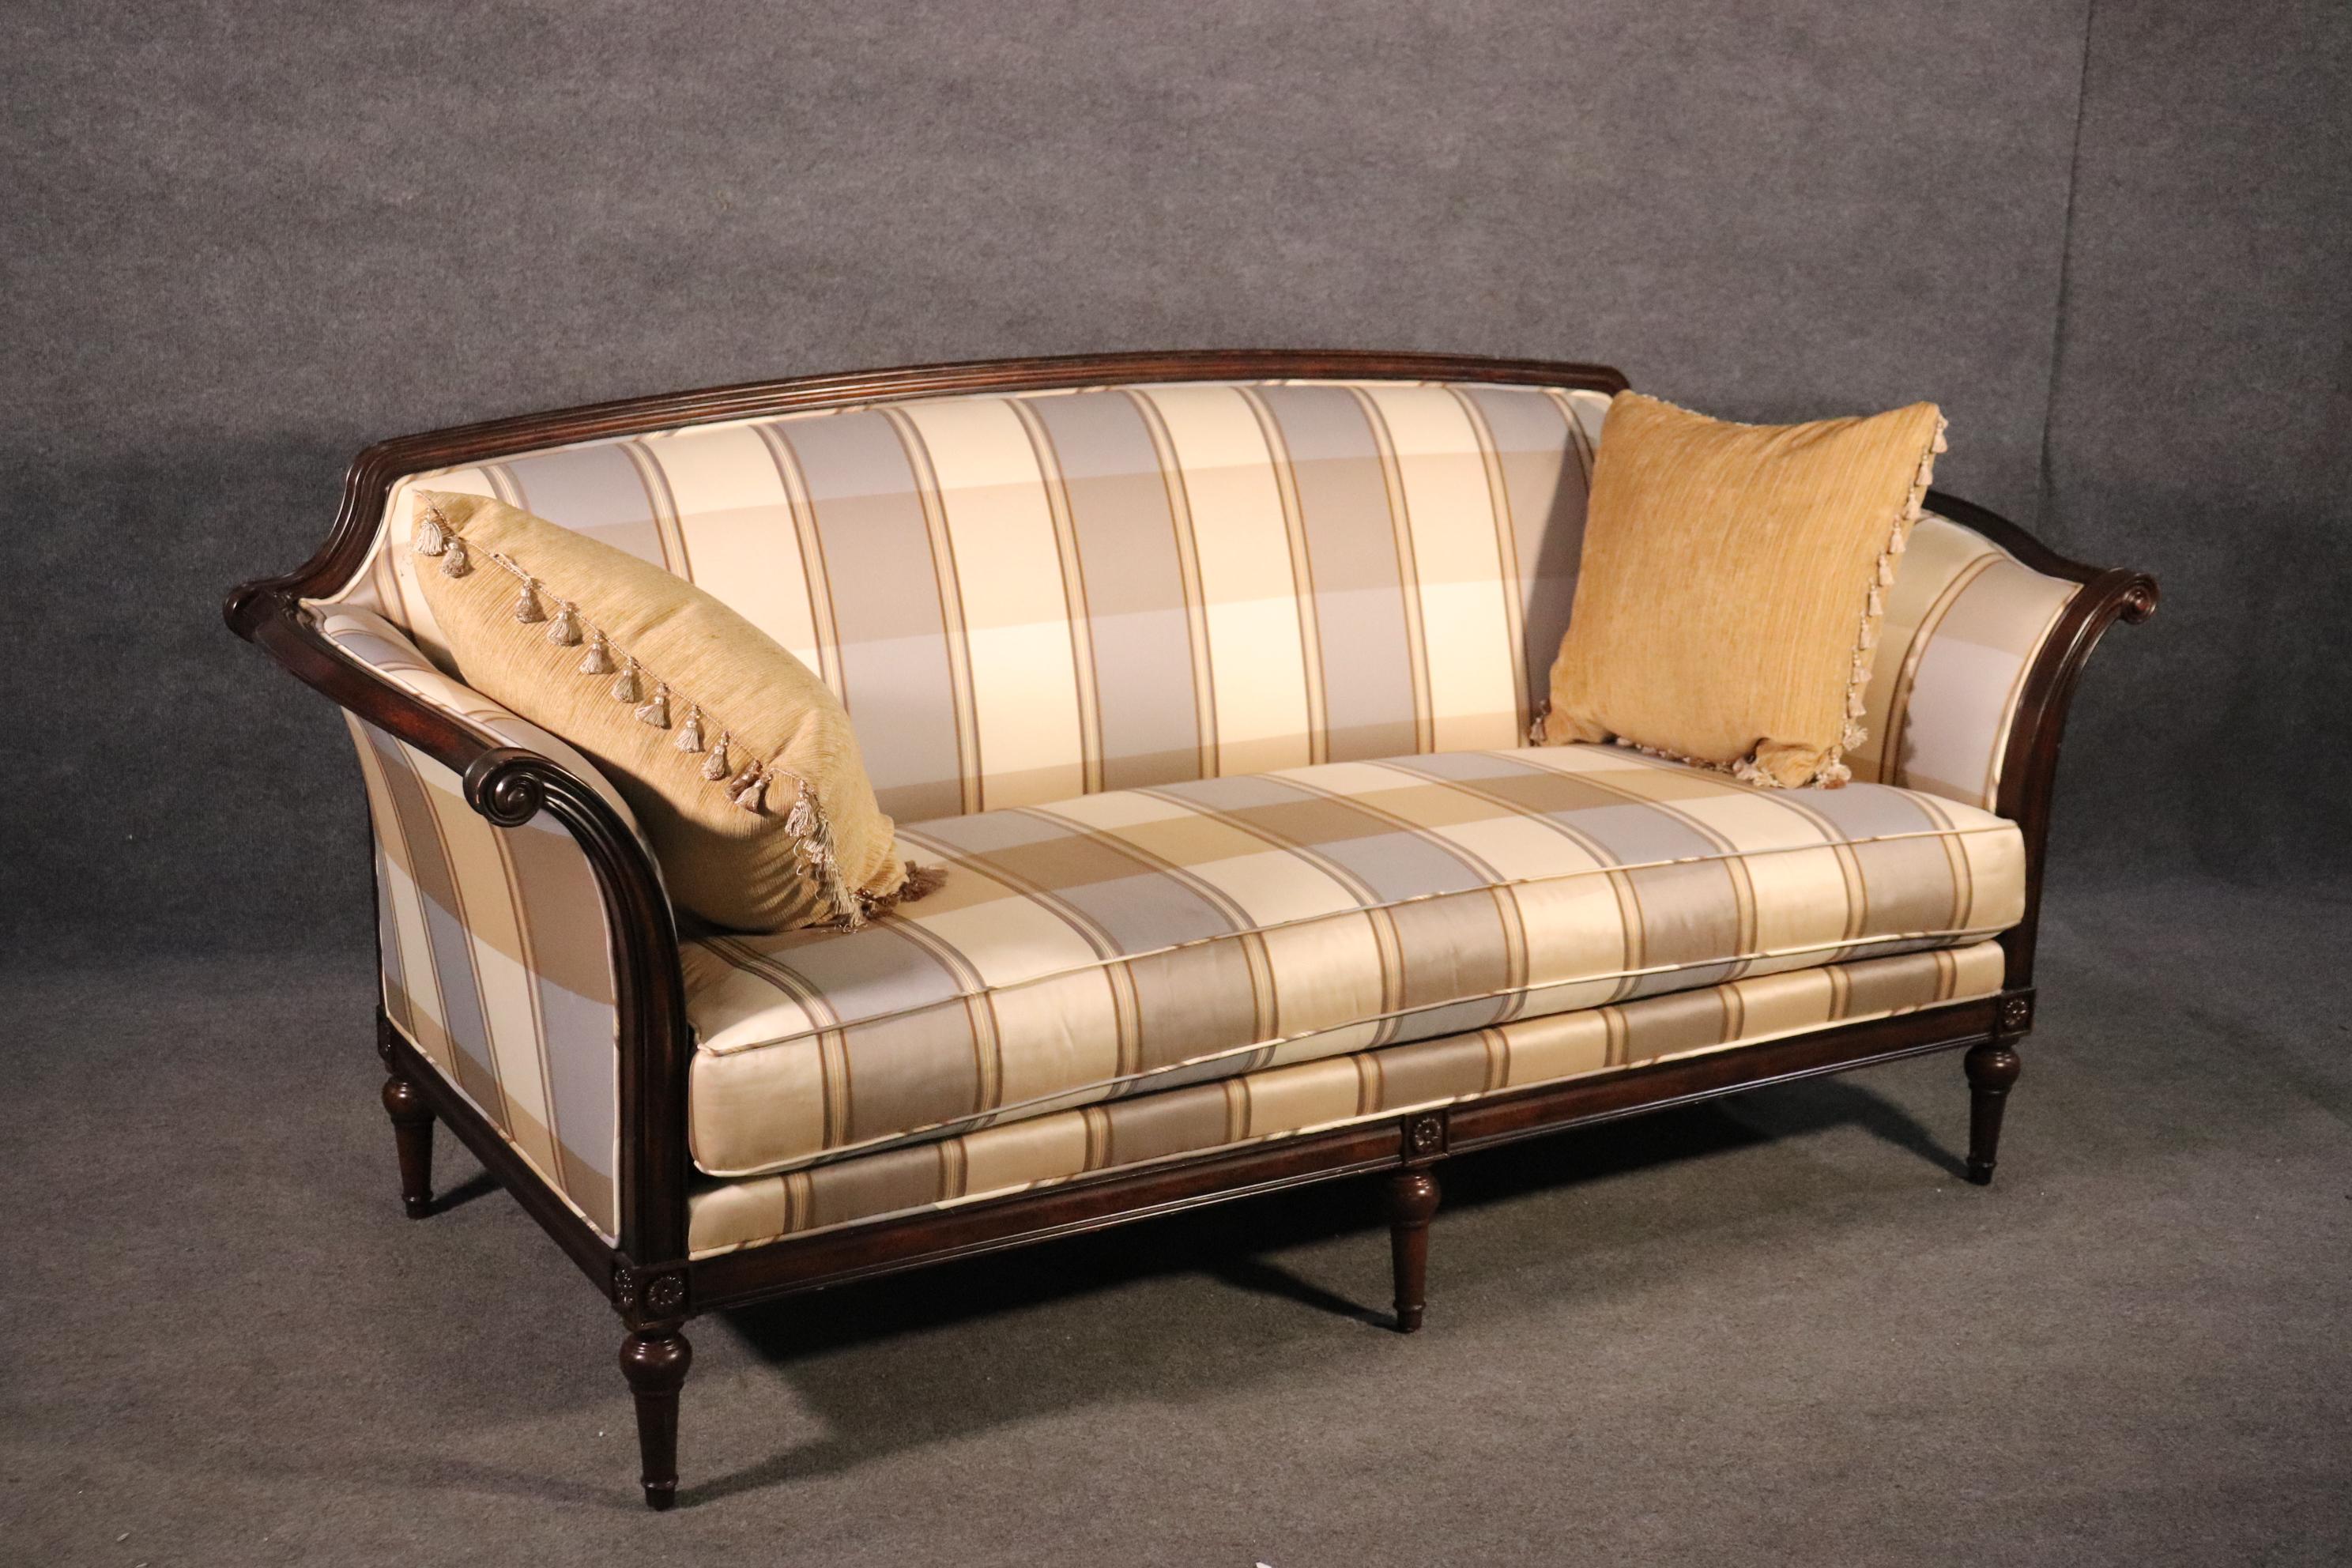 This is a beautiful sofa with gorgeous upholstery and a great carved walnut frame in the Louis XVI style. The sofa is American-made and of the highest quality. The upholstery is clean and while it is used, is not very worn or stained at all. The